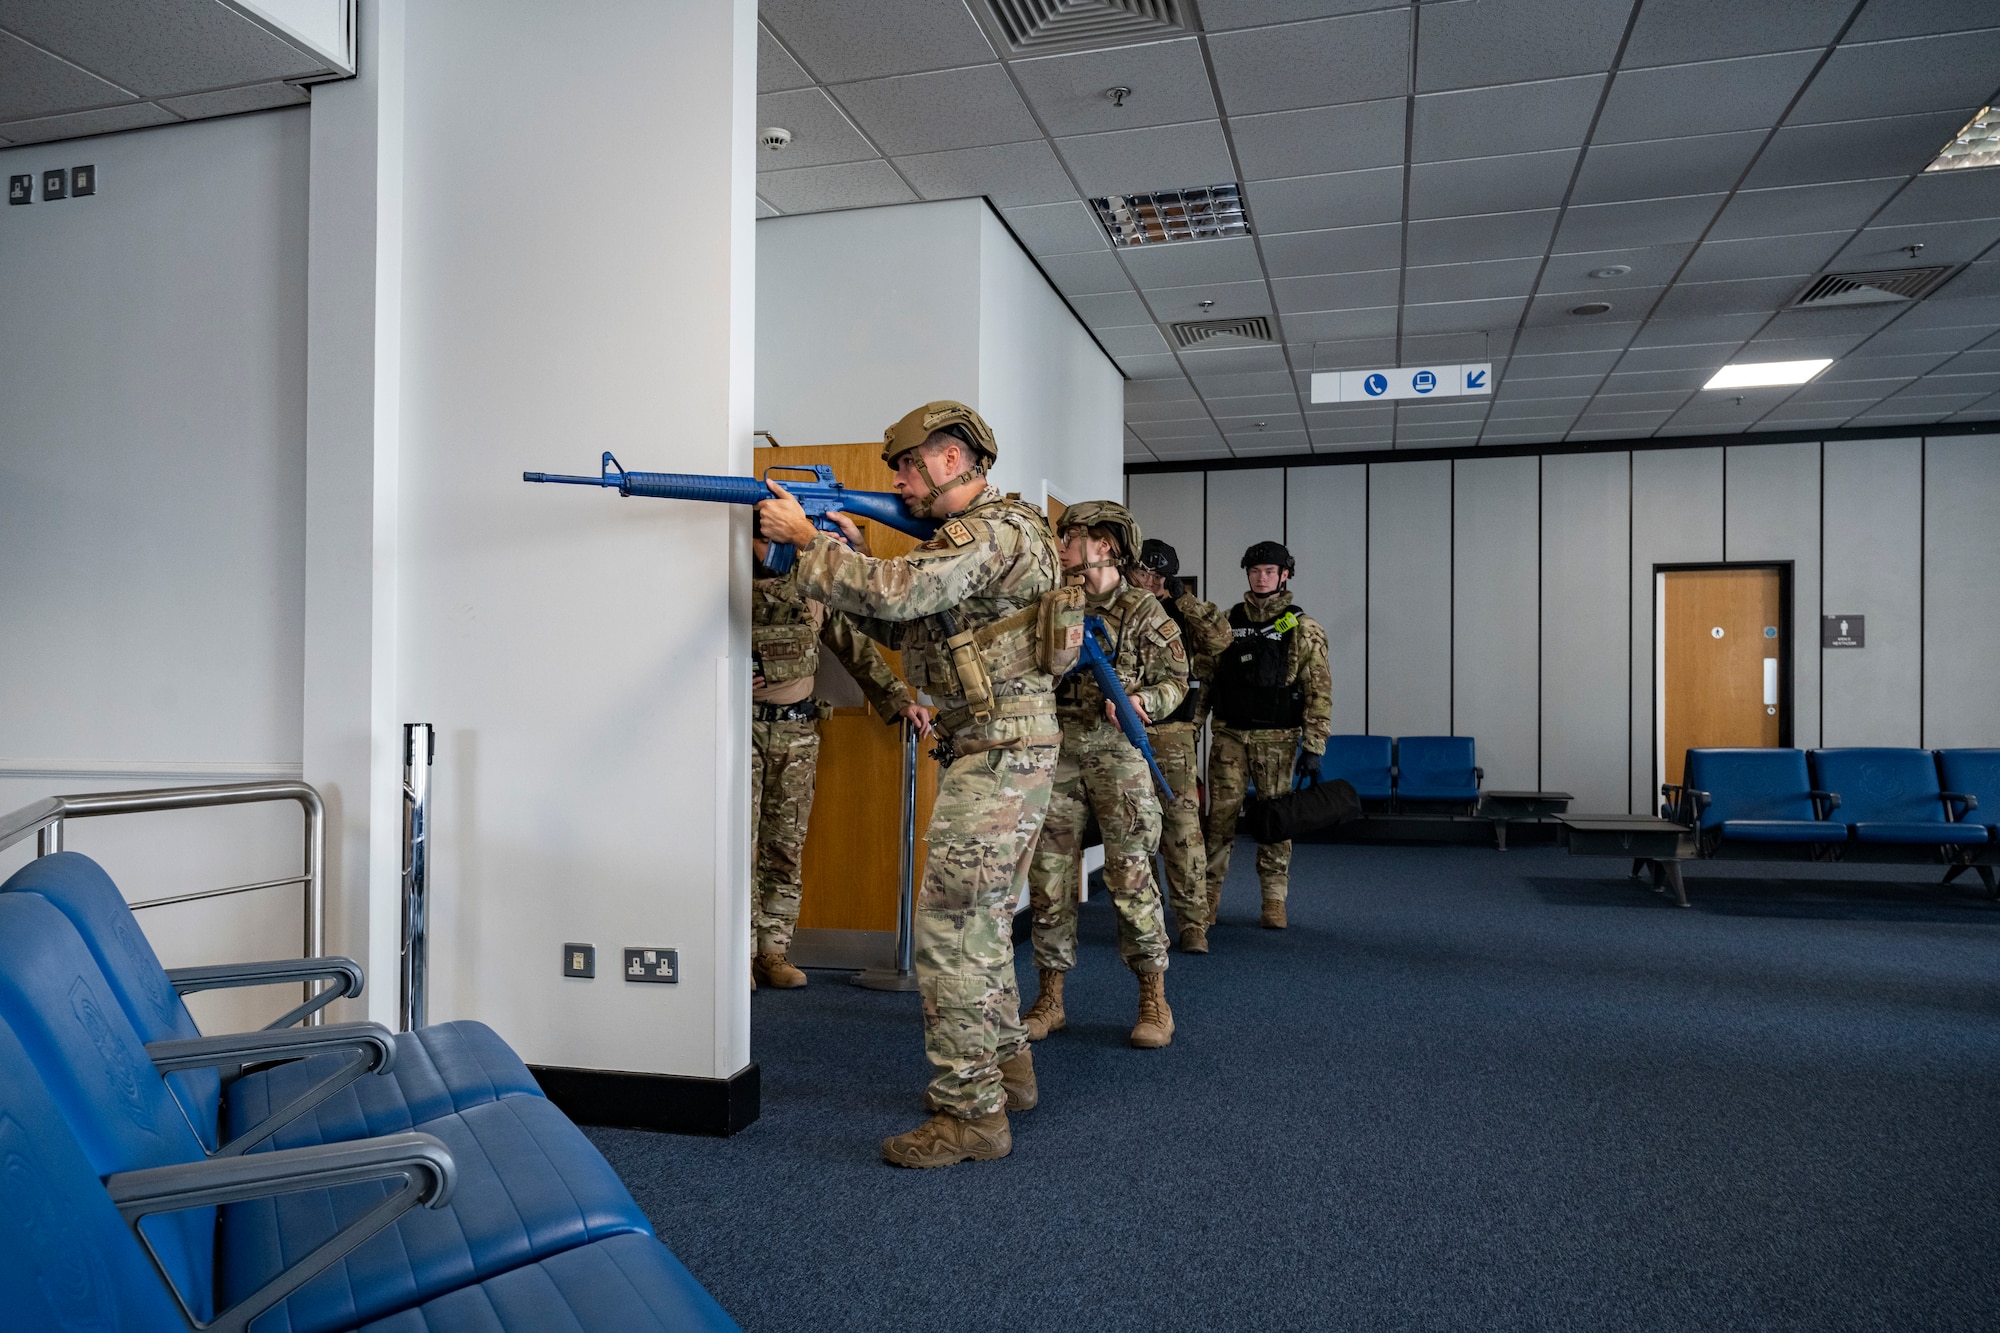 The exercise was designed to evaluate the training, readiness and capability of RAF Mildenhall first responders in order to effectively respond to active shooter threats to the installation.